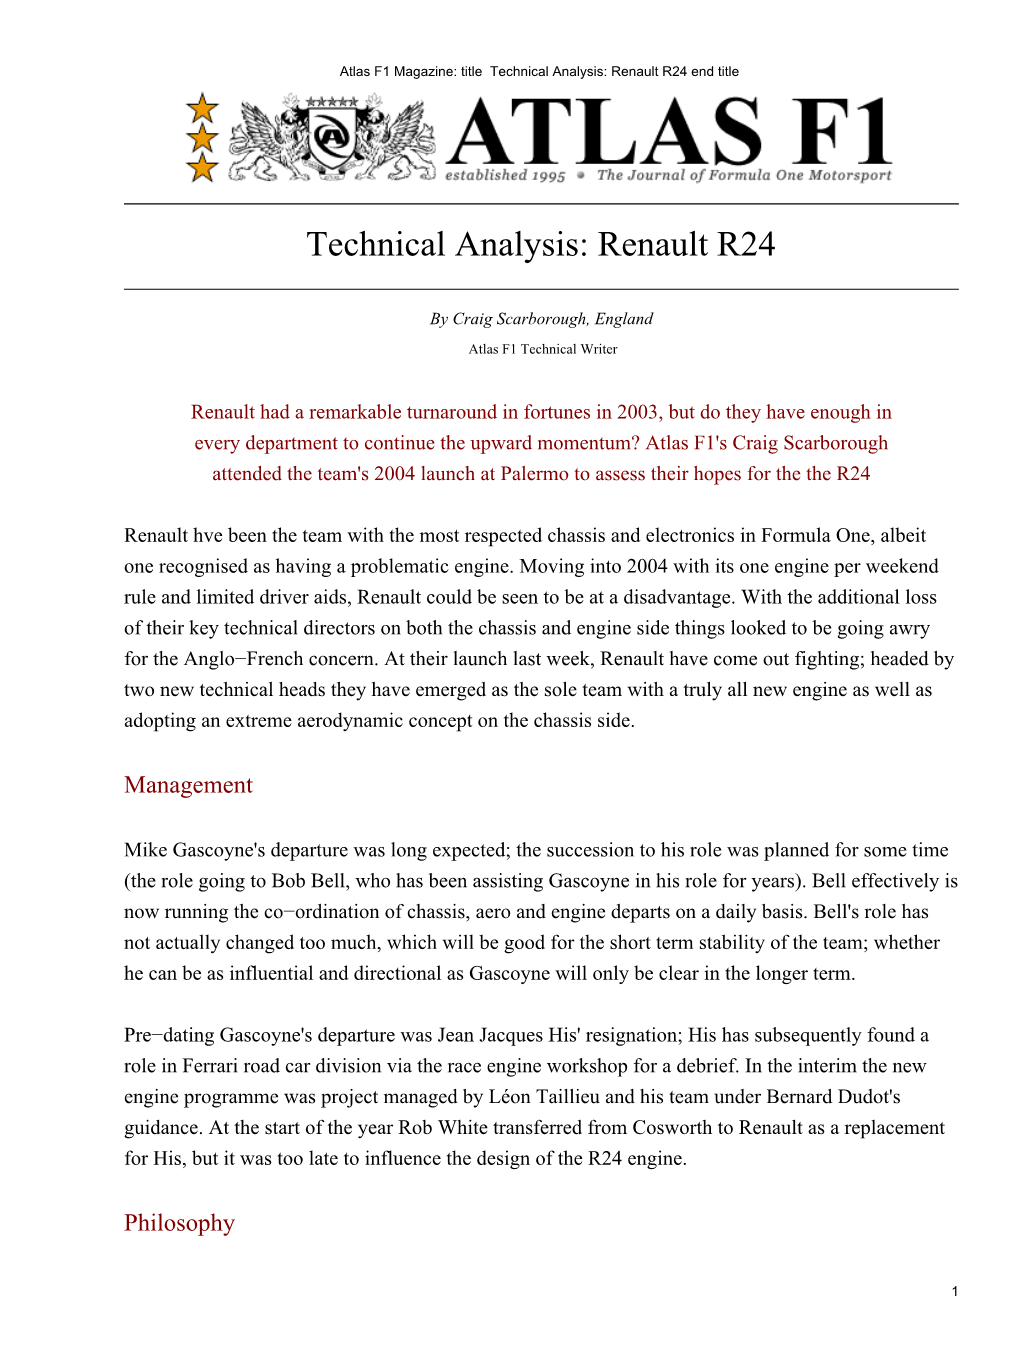 Atlas F1 Magazine: Title Technical Analysis: Renault R24 End Title